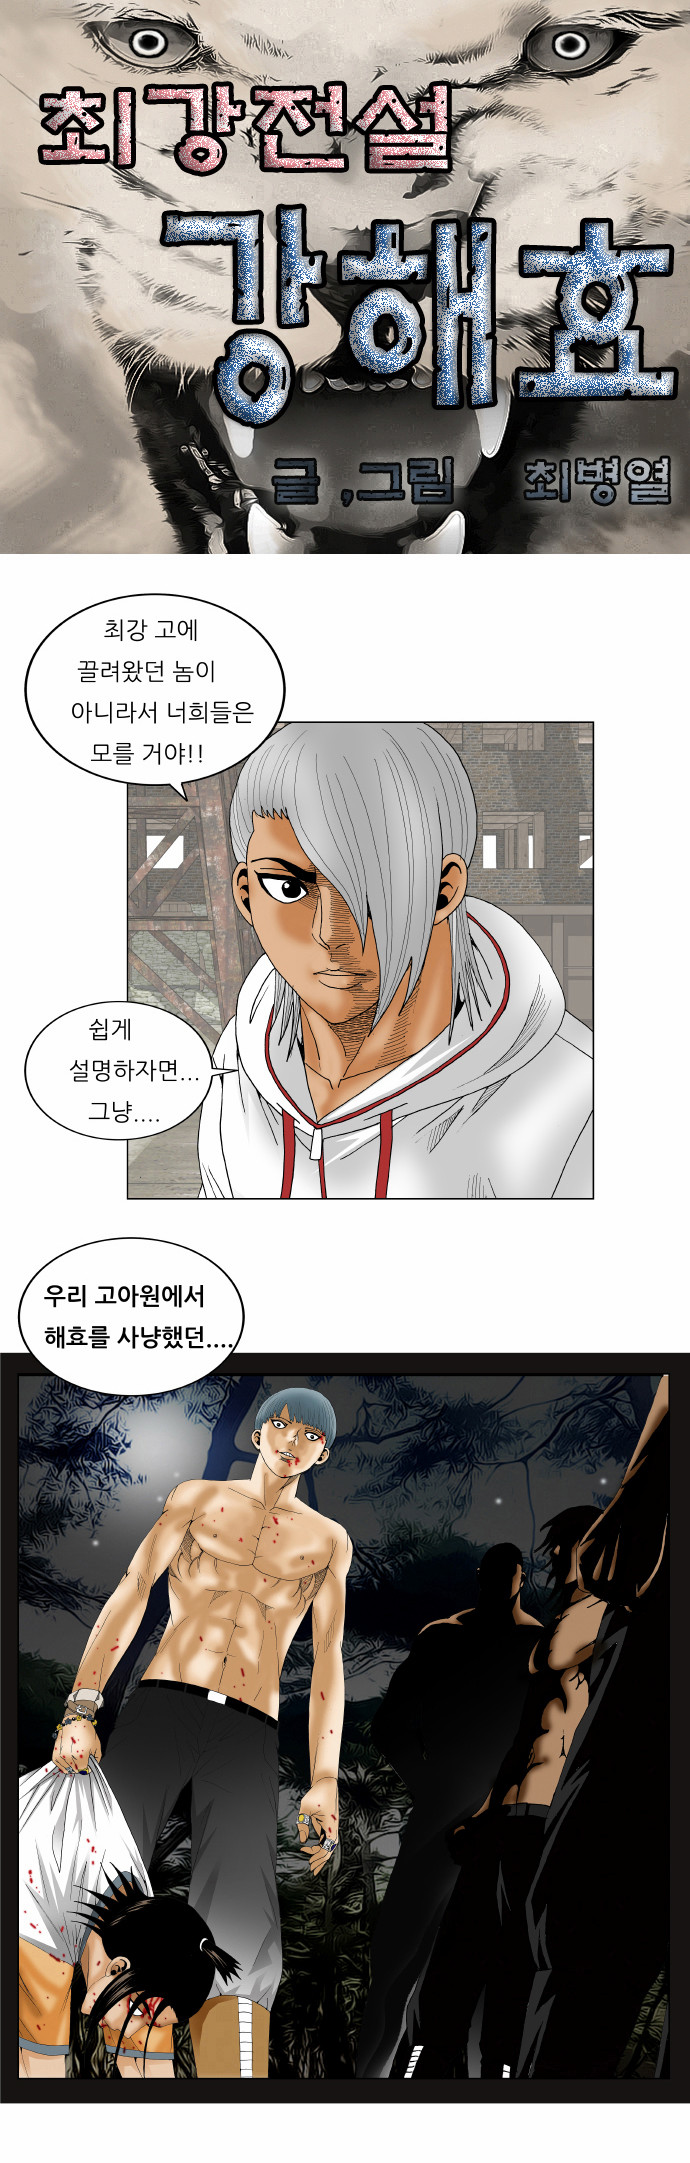 Ultimate Legend - Kang Hae Hyo - Chapter 155 - Page 1